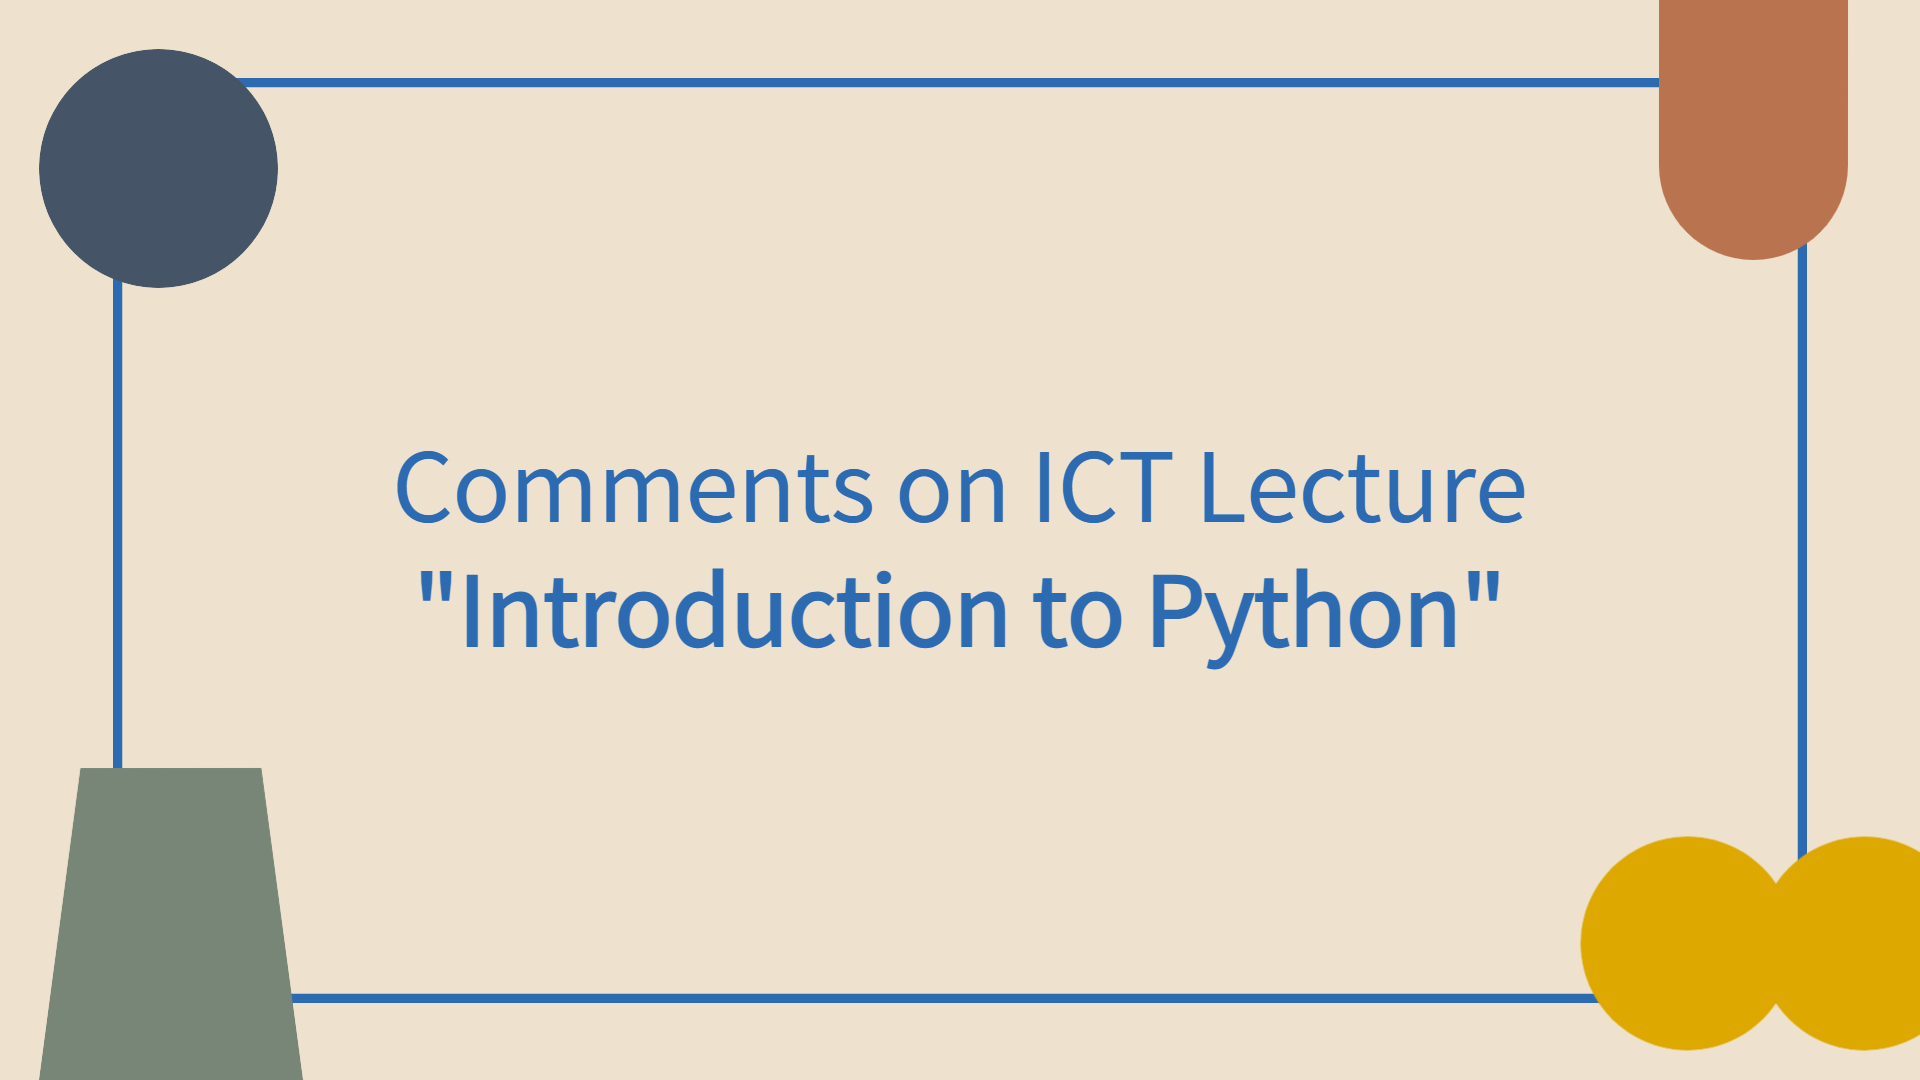 Comments on Introduction to Python